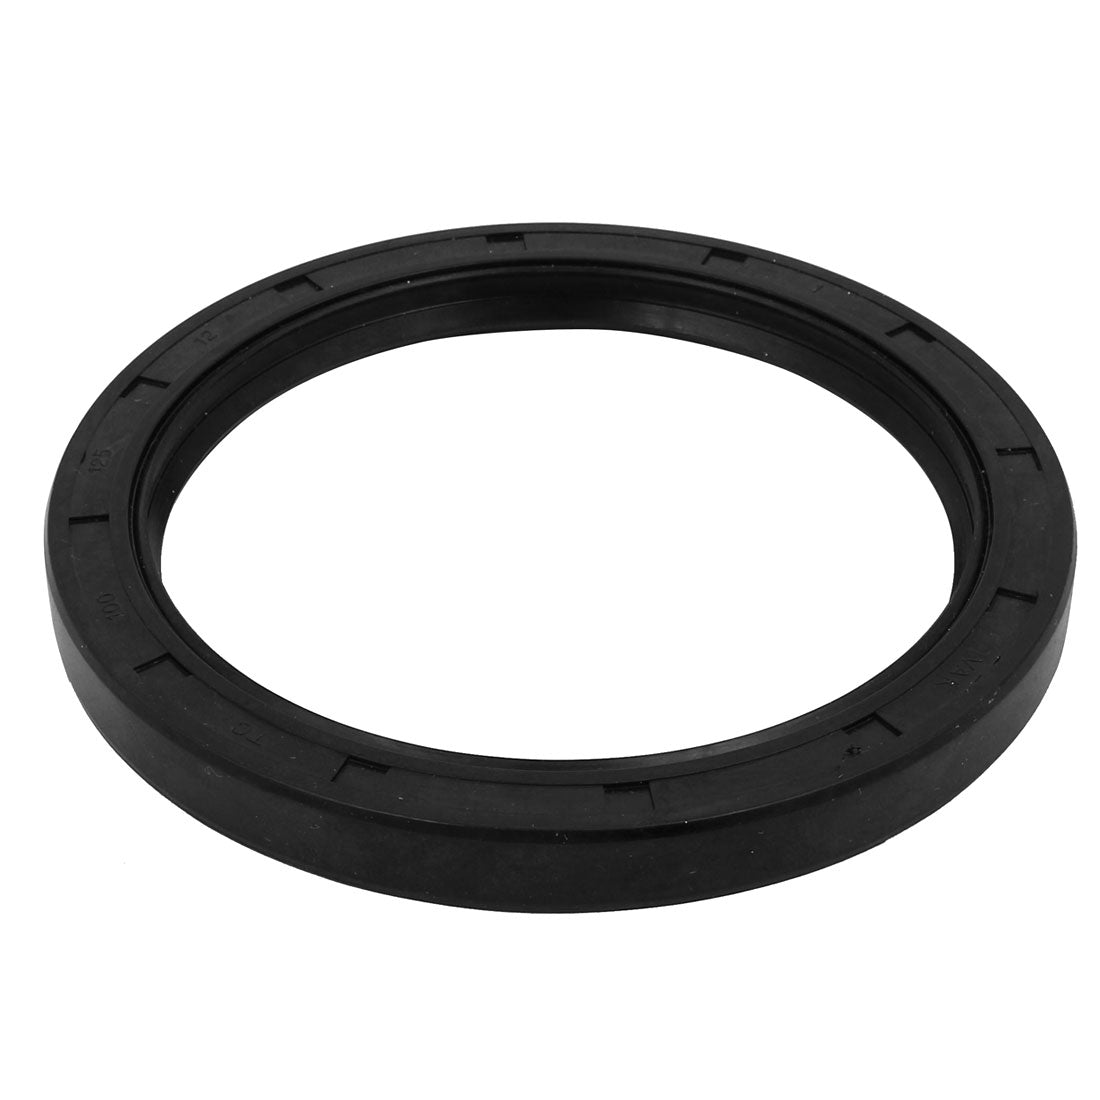 Uxcell Uxcell Machine Rubber Oil Seal Sealing Ring Gasket Washer Black 100mmx125mmx12mm